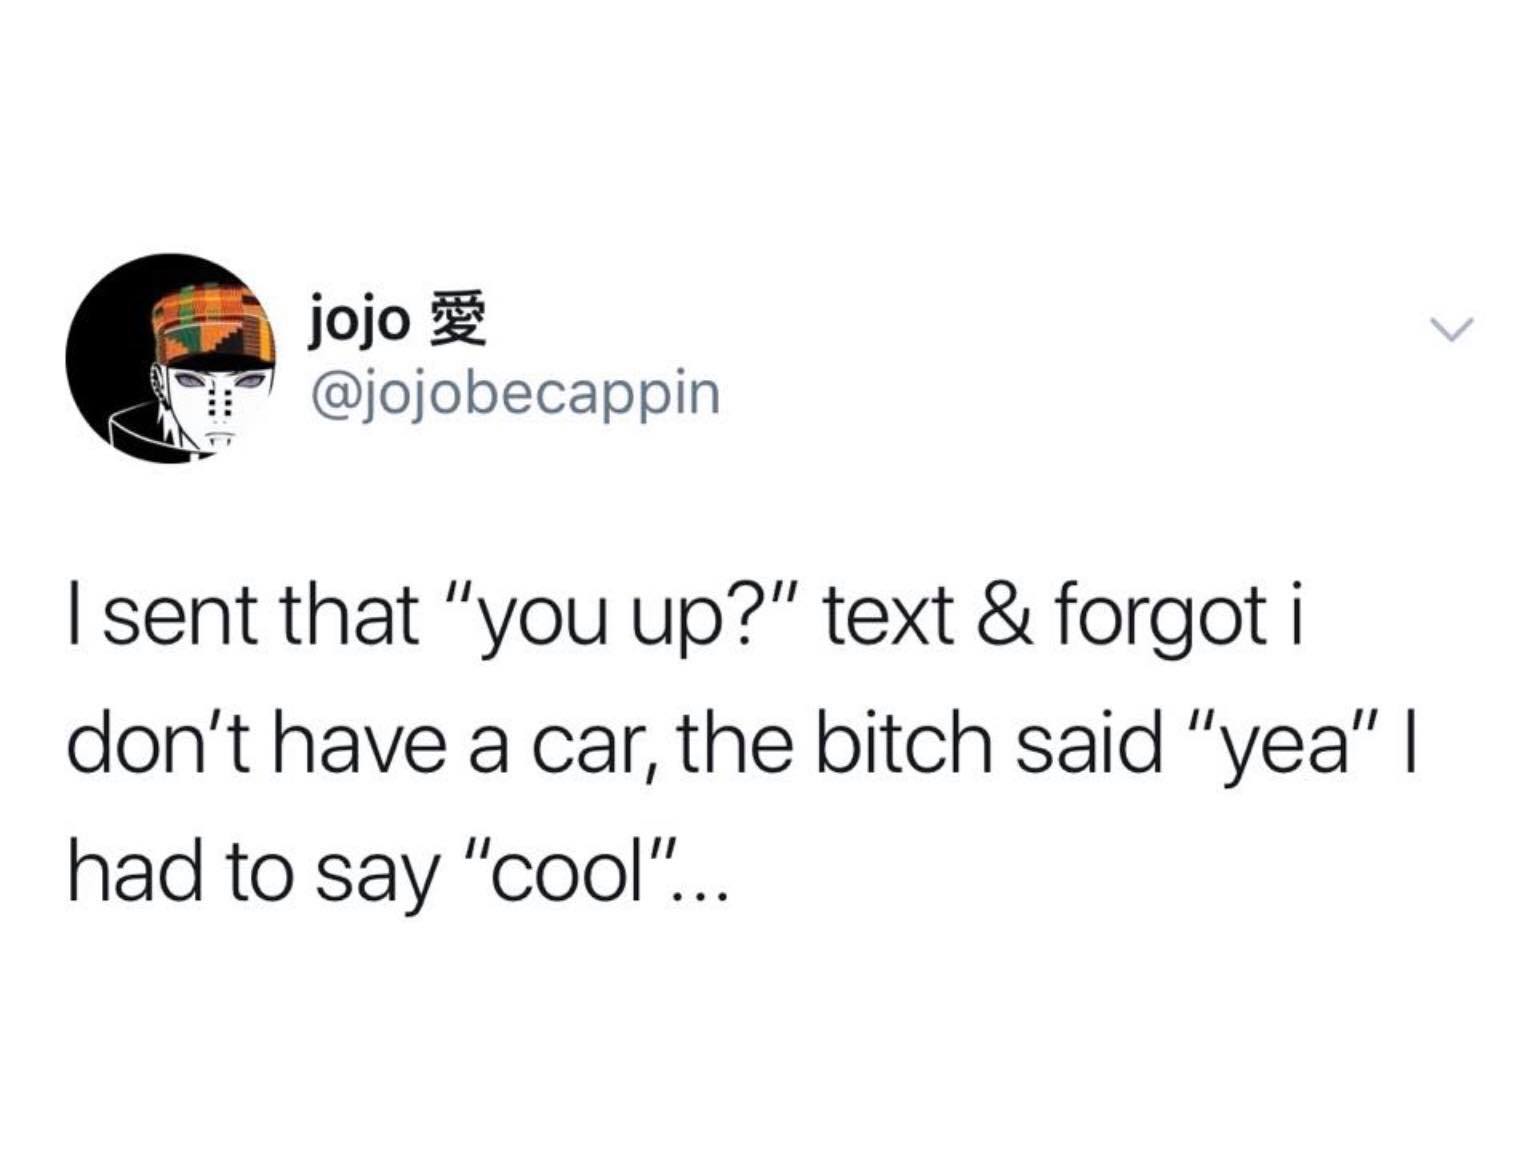 girls mark their territory by leaving their fucking hair everywhere - jojo e I sent that "you up?" text & forgot i don't have a car, the bitch said "yea" || had to say "cool"...